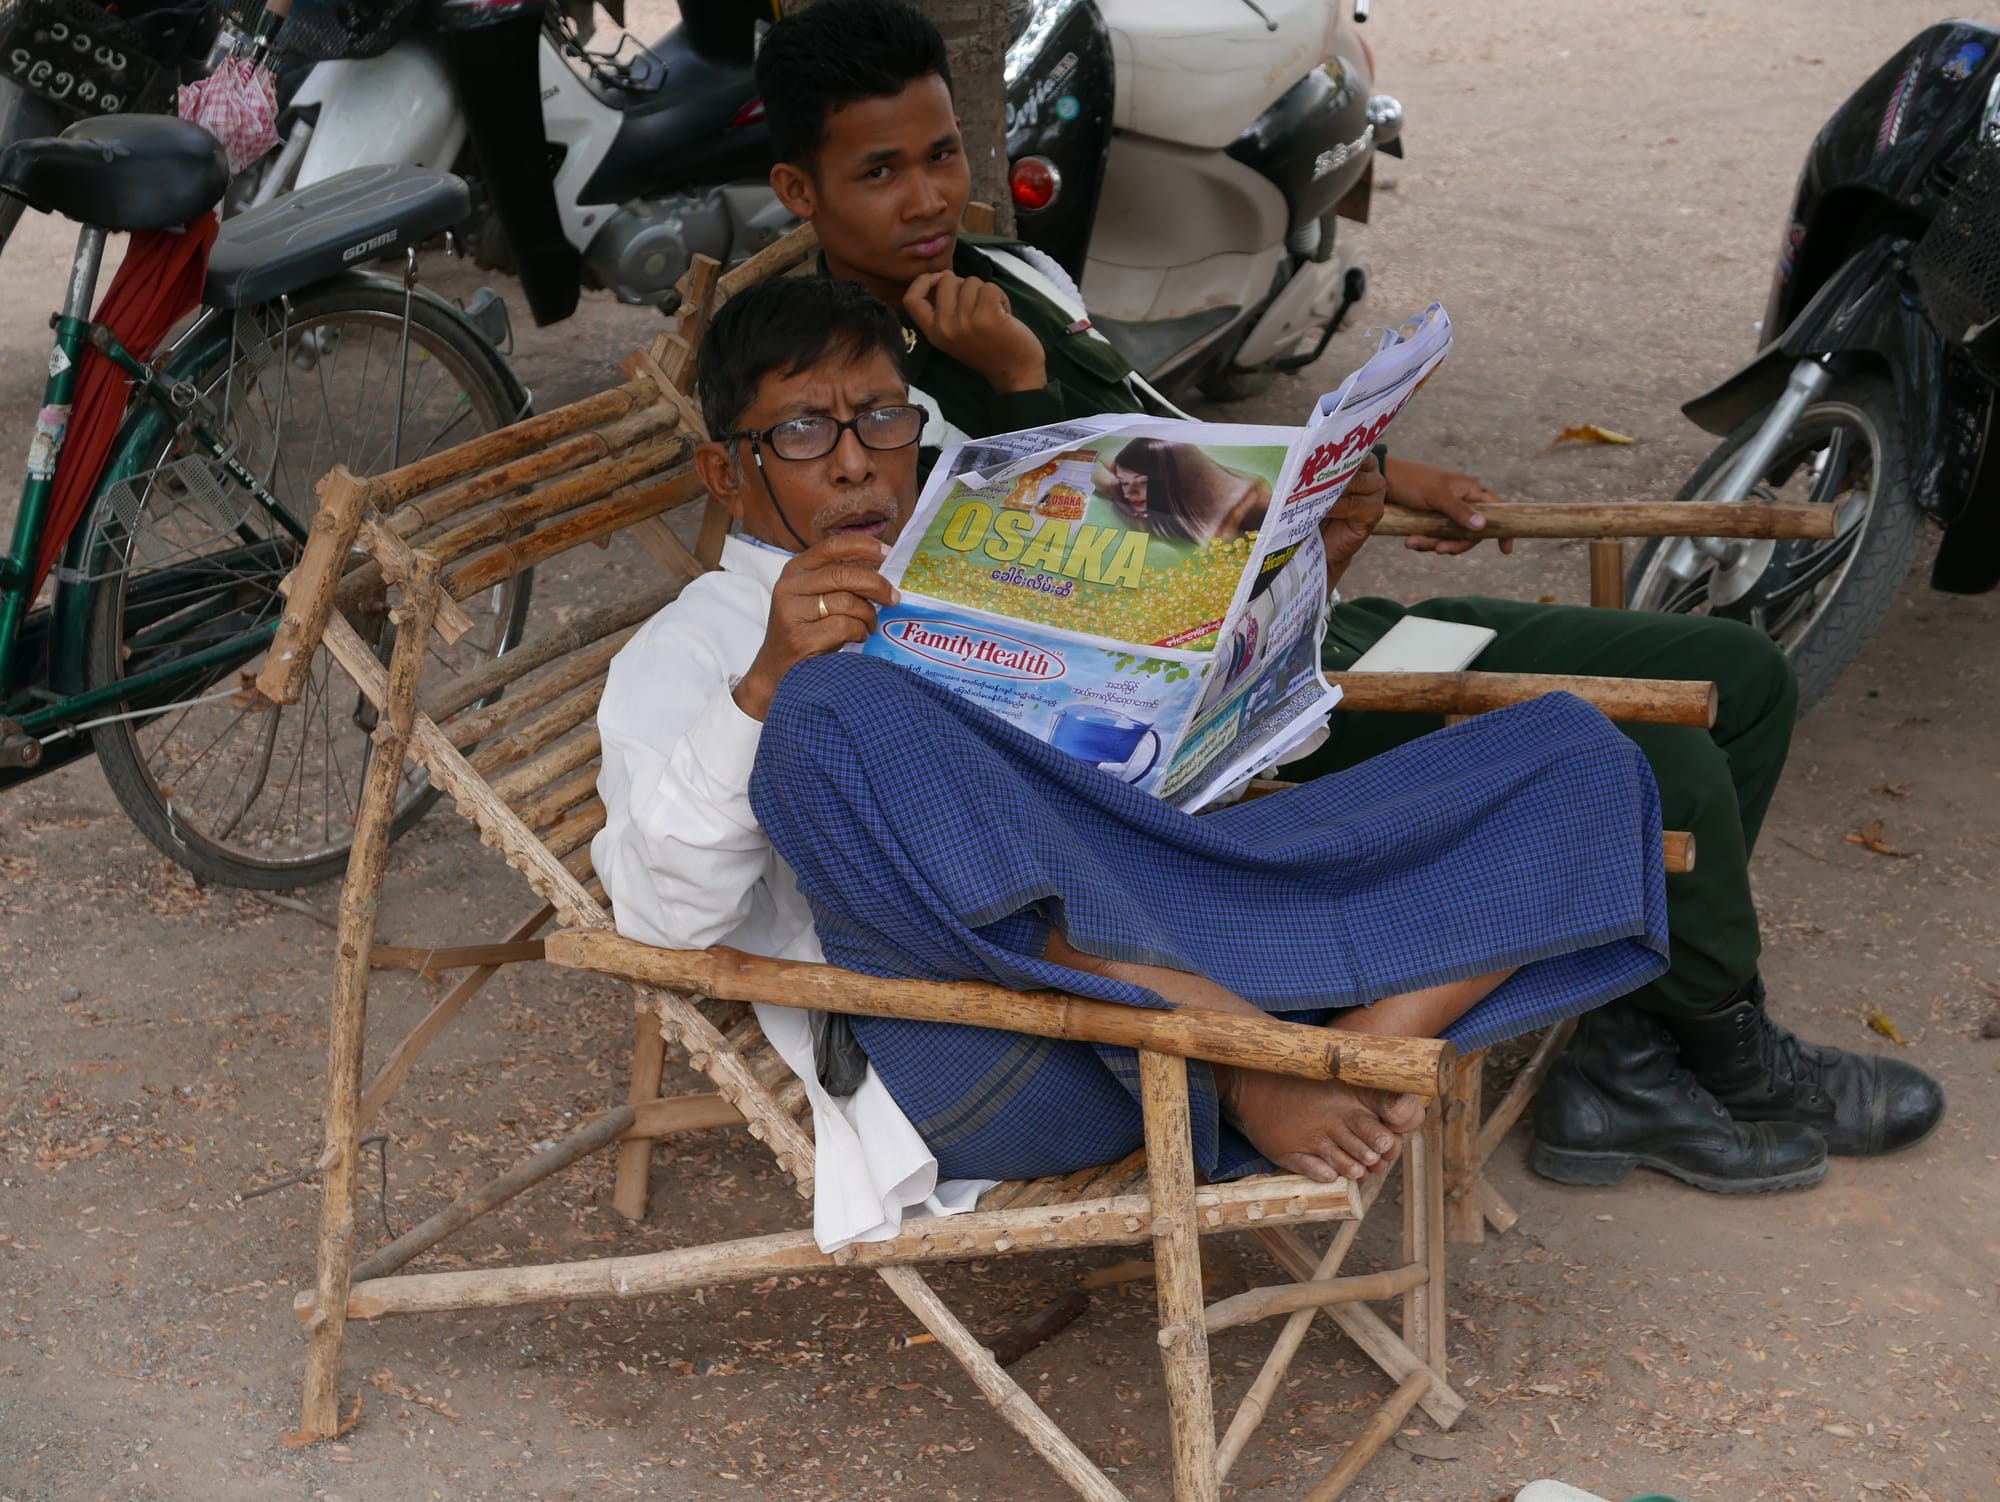 Photo by Author — relaxing in the grounds of the Mandalay Grand Royal Palace